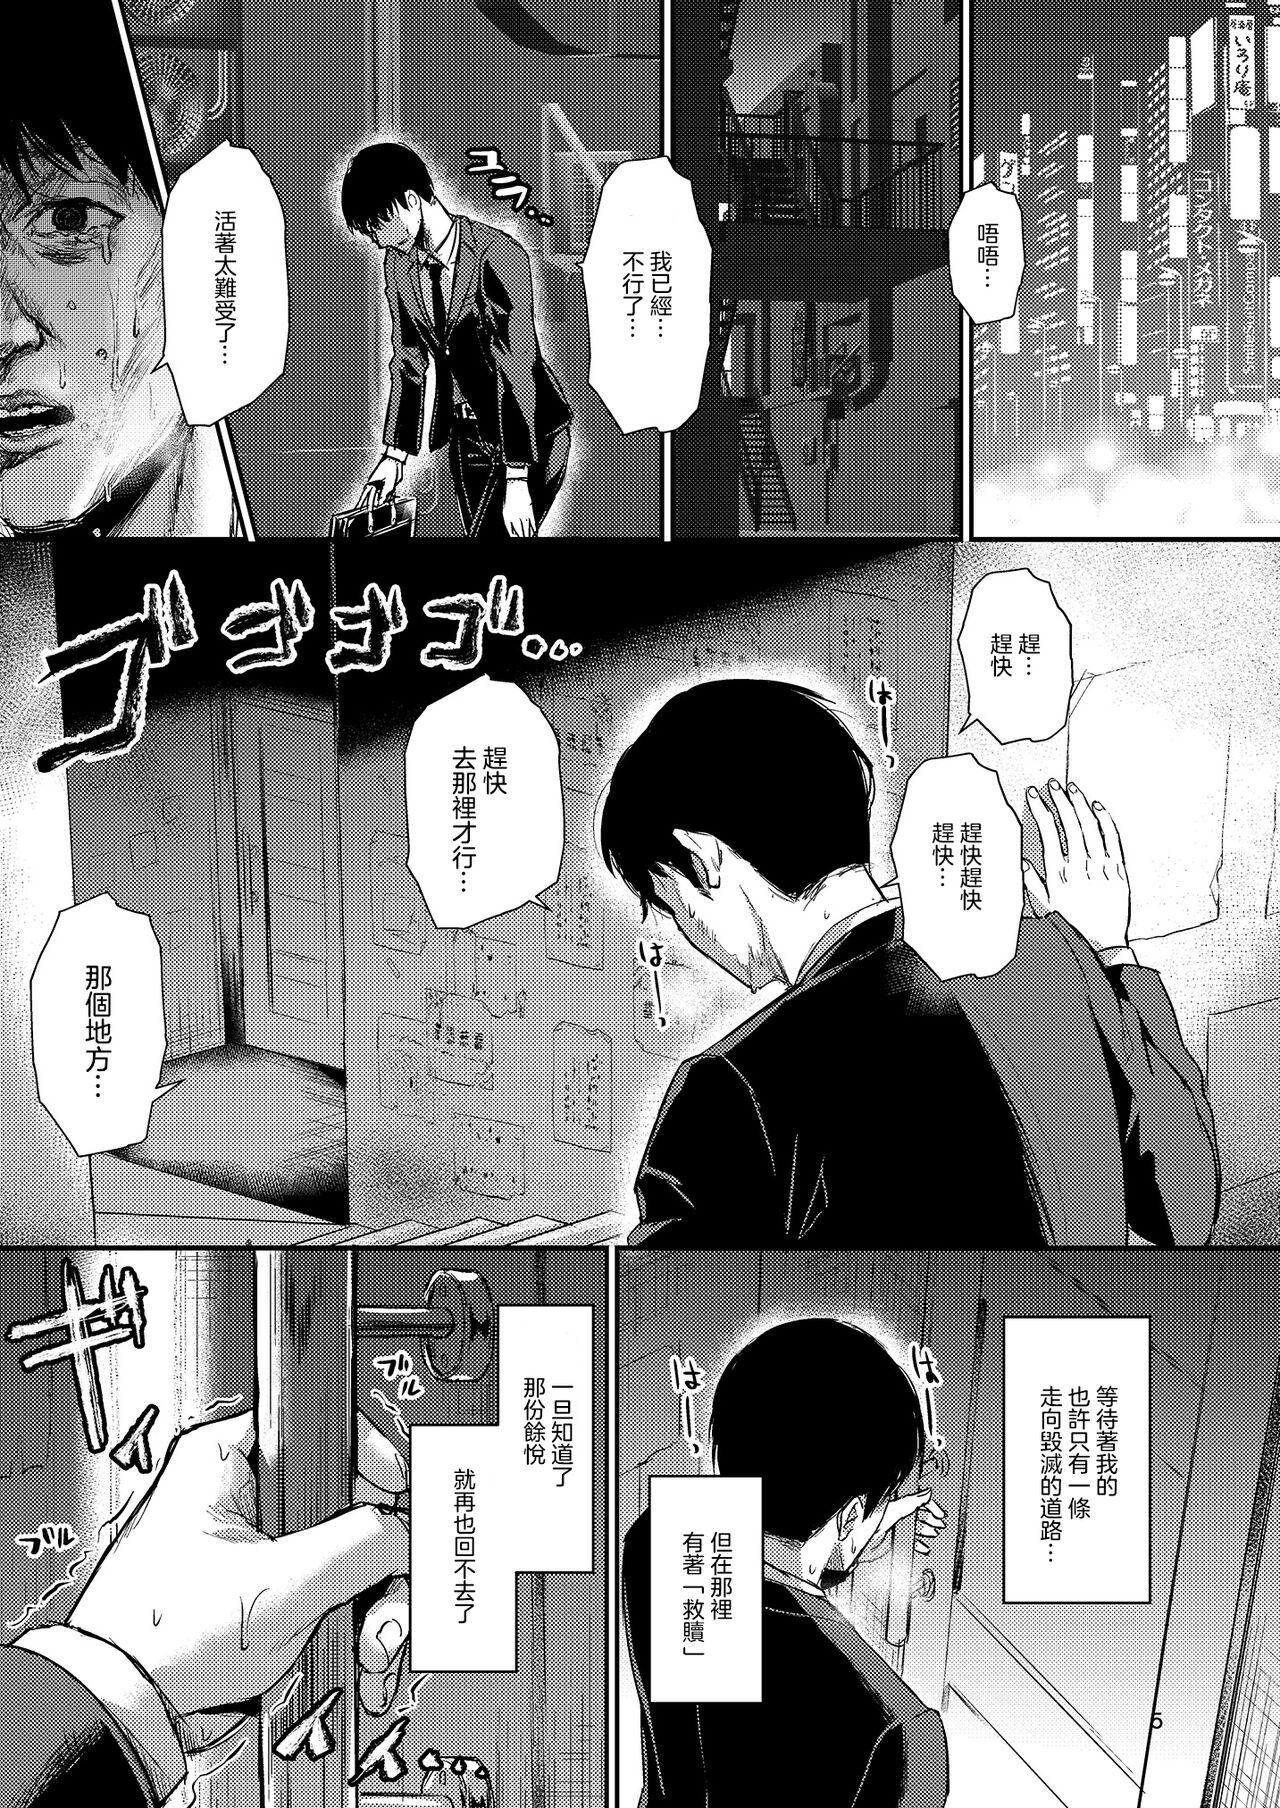 Older Homehome Home e Youkoso! - Welcome to Home Home Home! | 歡迎來到誇誇屋！ Brother Sister - Page 6